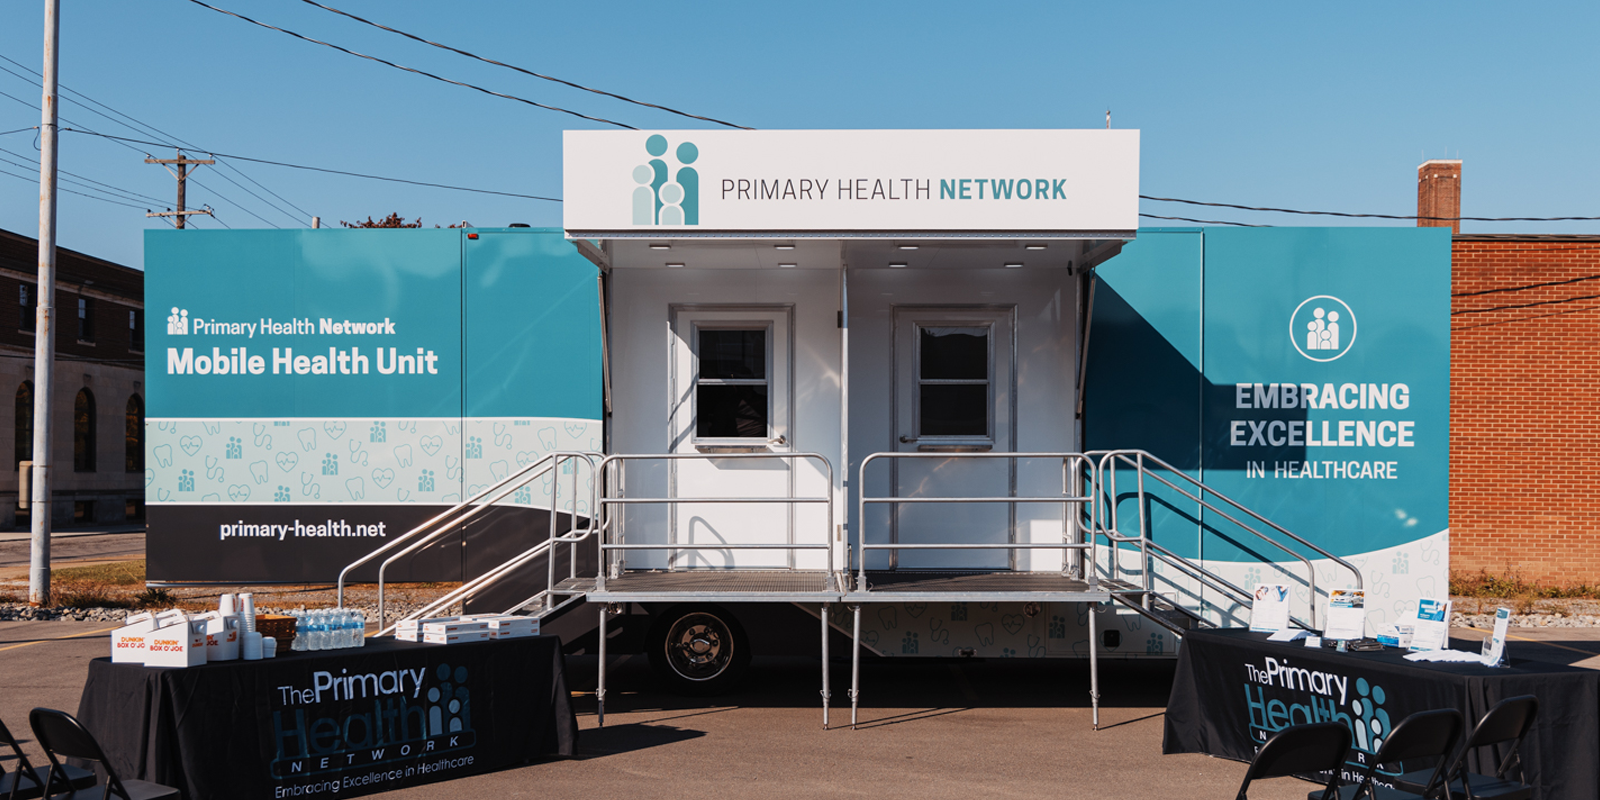 Our Mobile Health Services